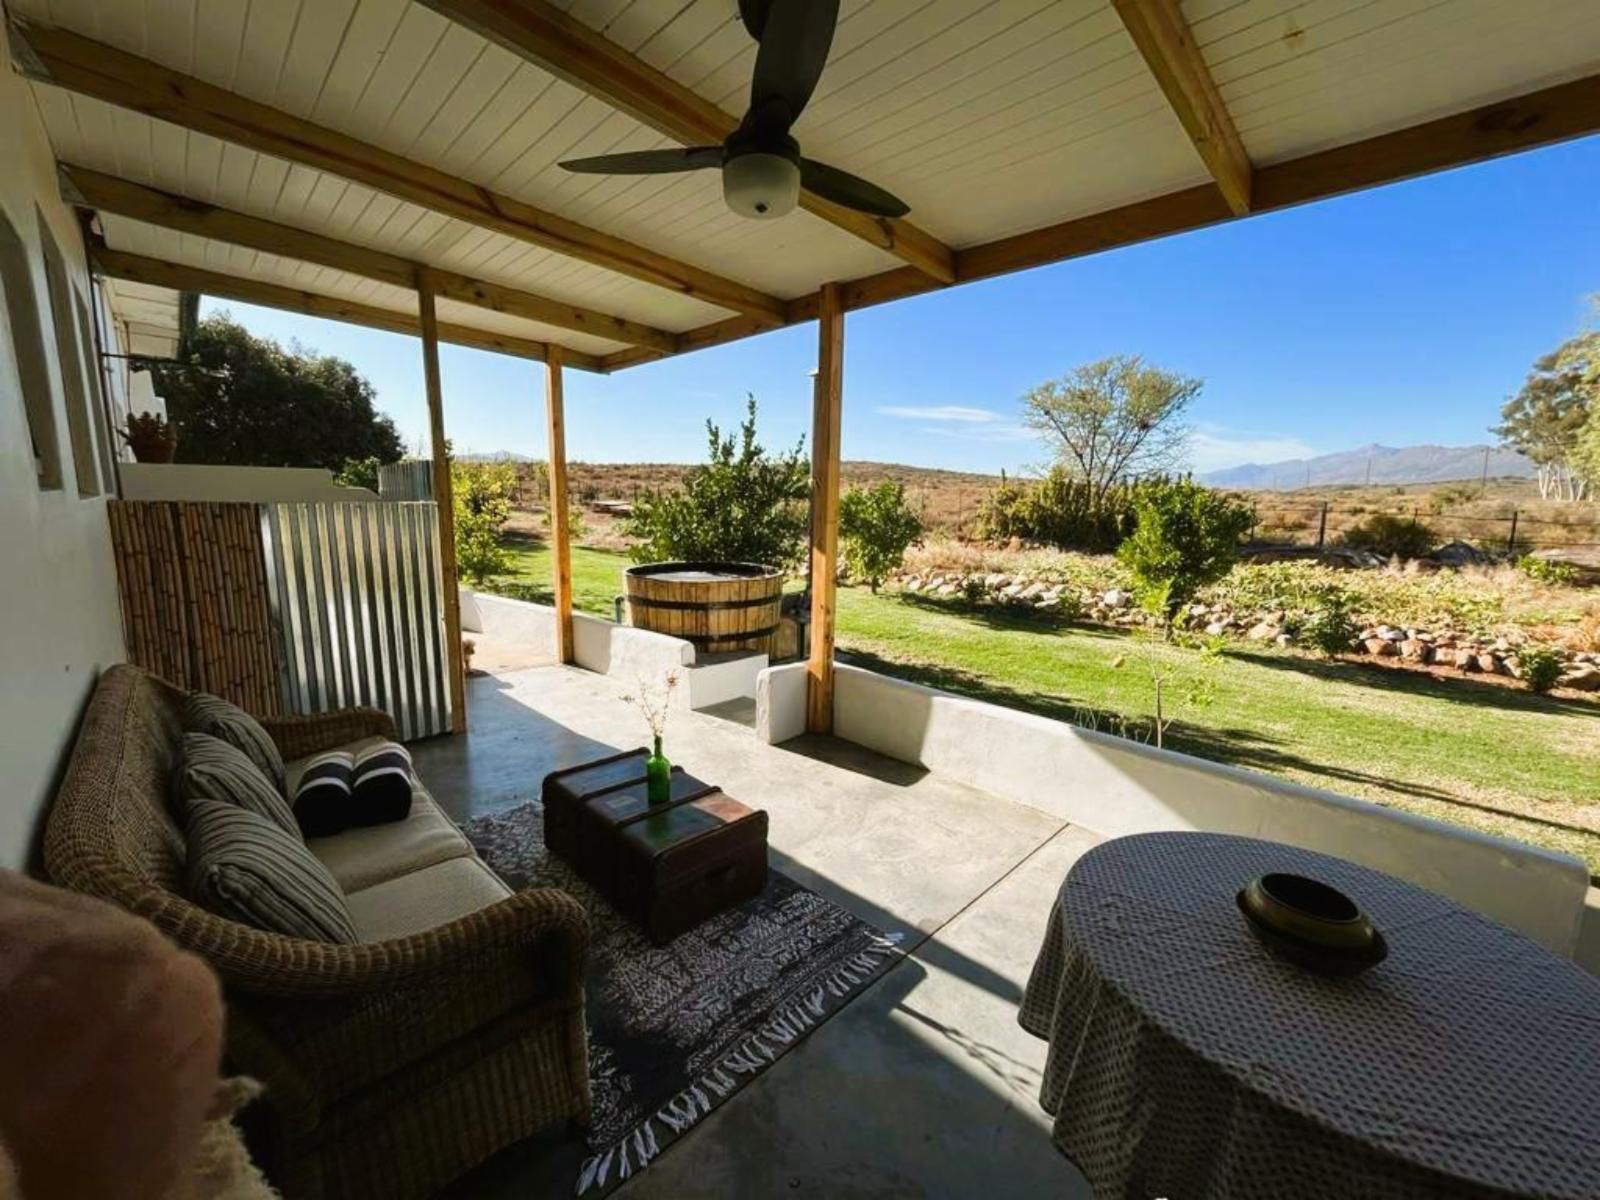 360 On 62 Montagu Western Cape South Africa Garden, Nature, Plant, Living Room